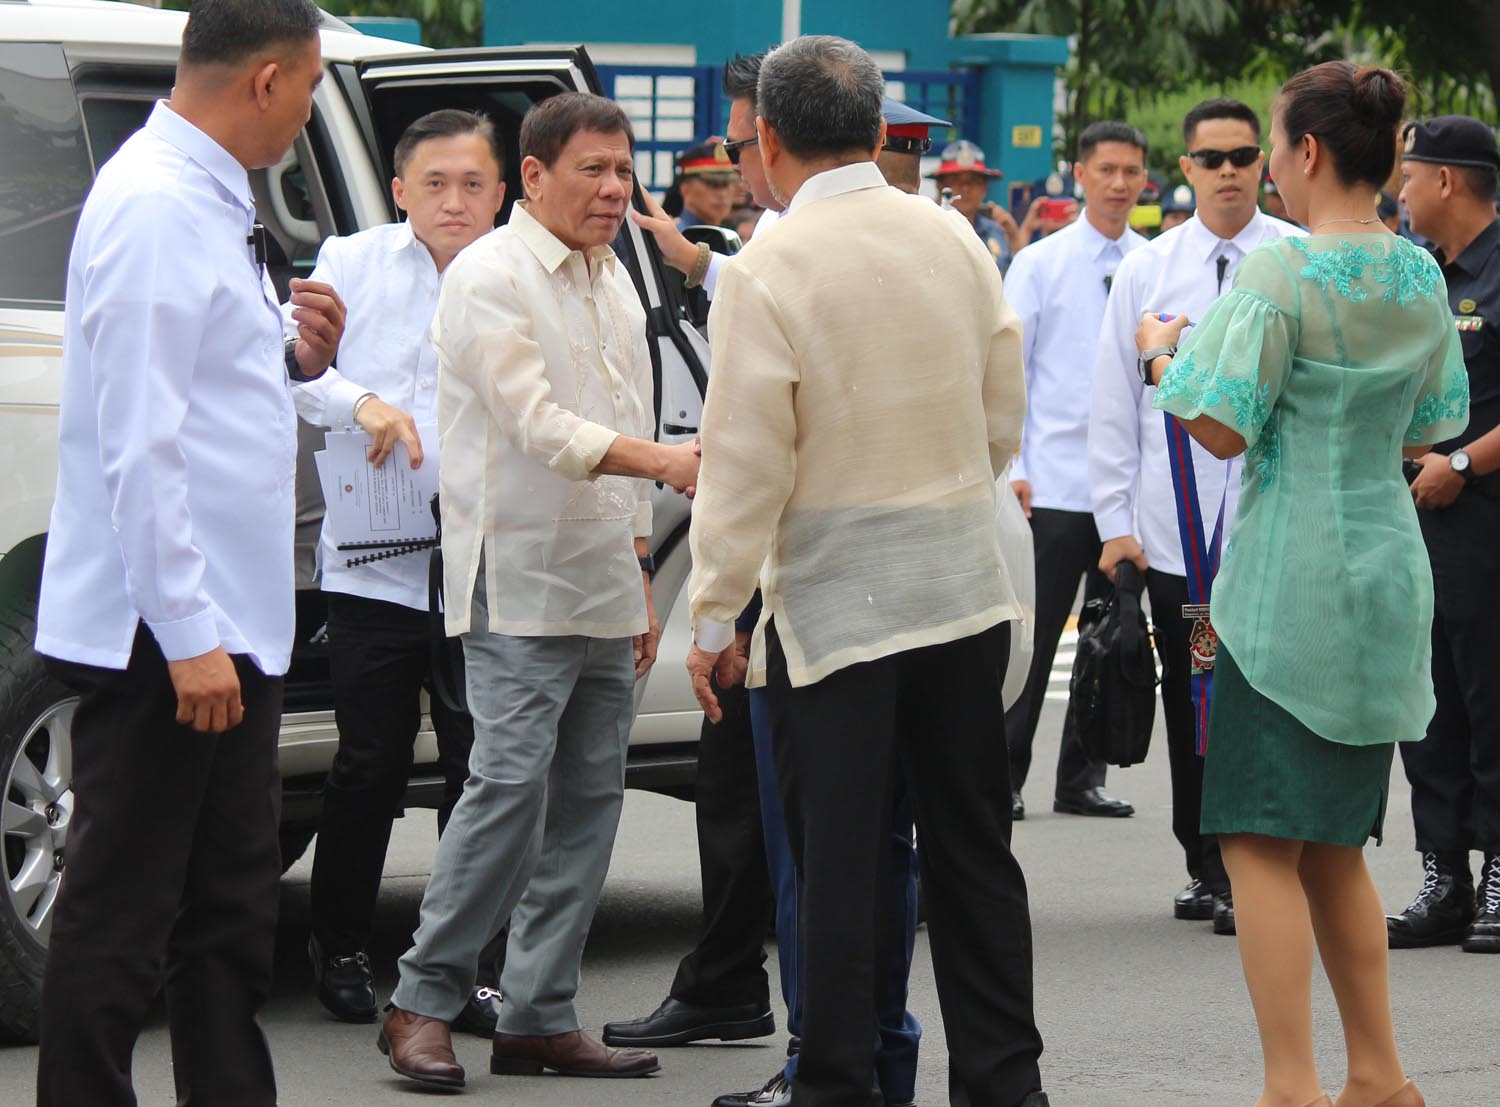 DUTERTE AND AIDE. President Rodrigo Duterte arrives for a PNP ceremony closely followed by his aide Bong Go (man holding documents). File photo by Joel Liporada/Rappler 